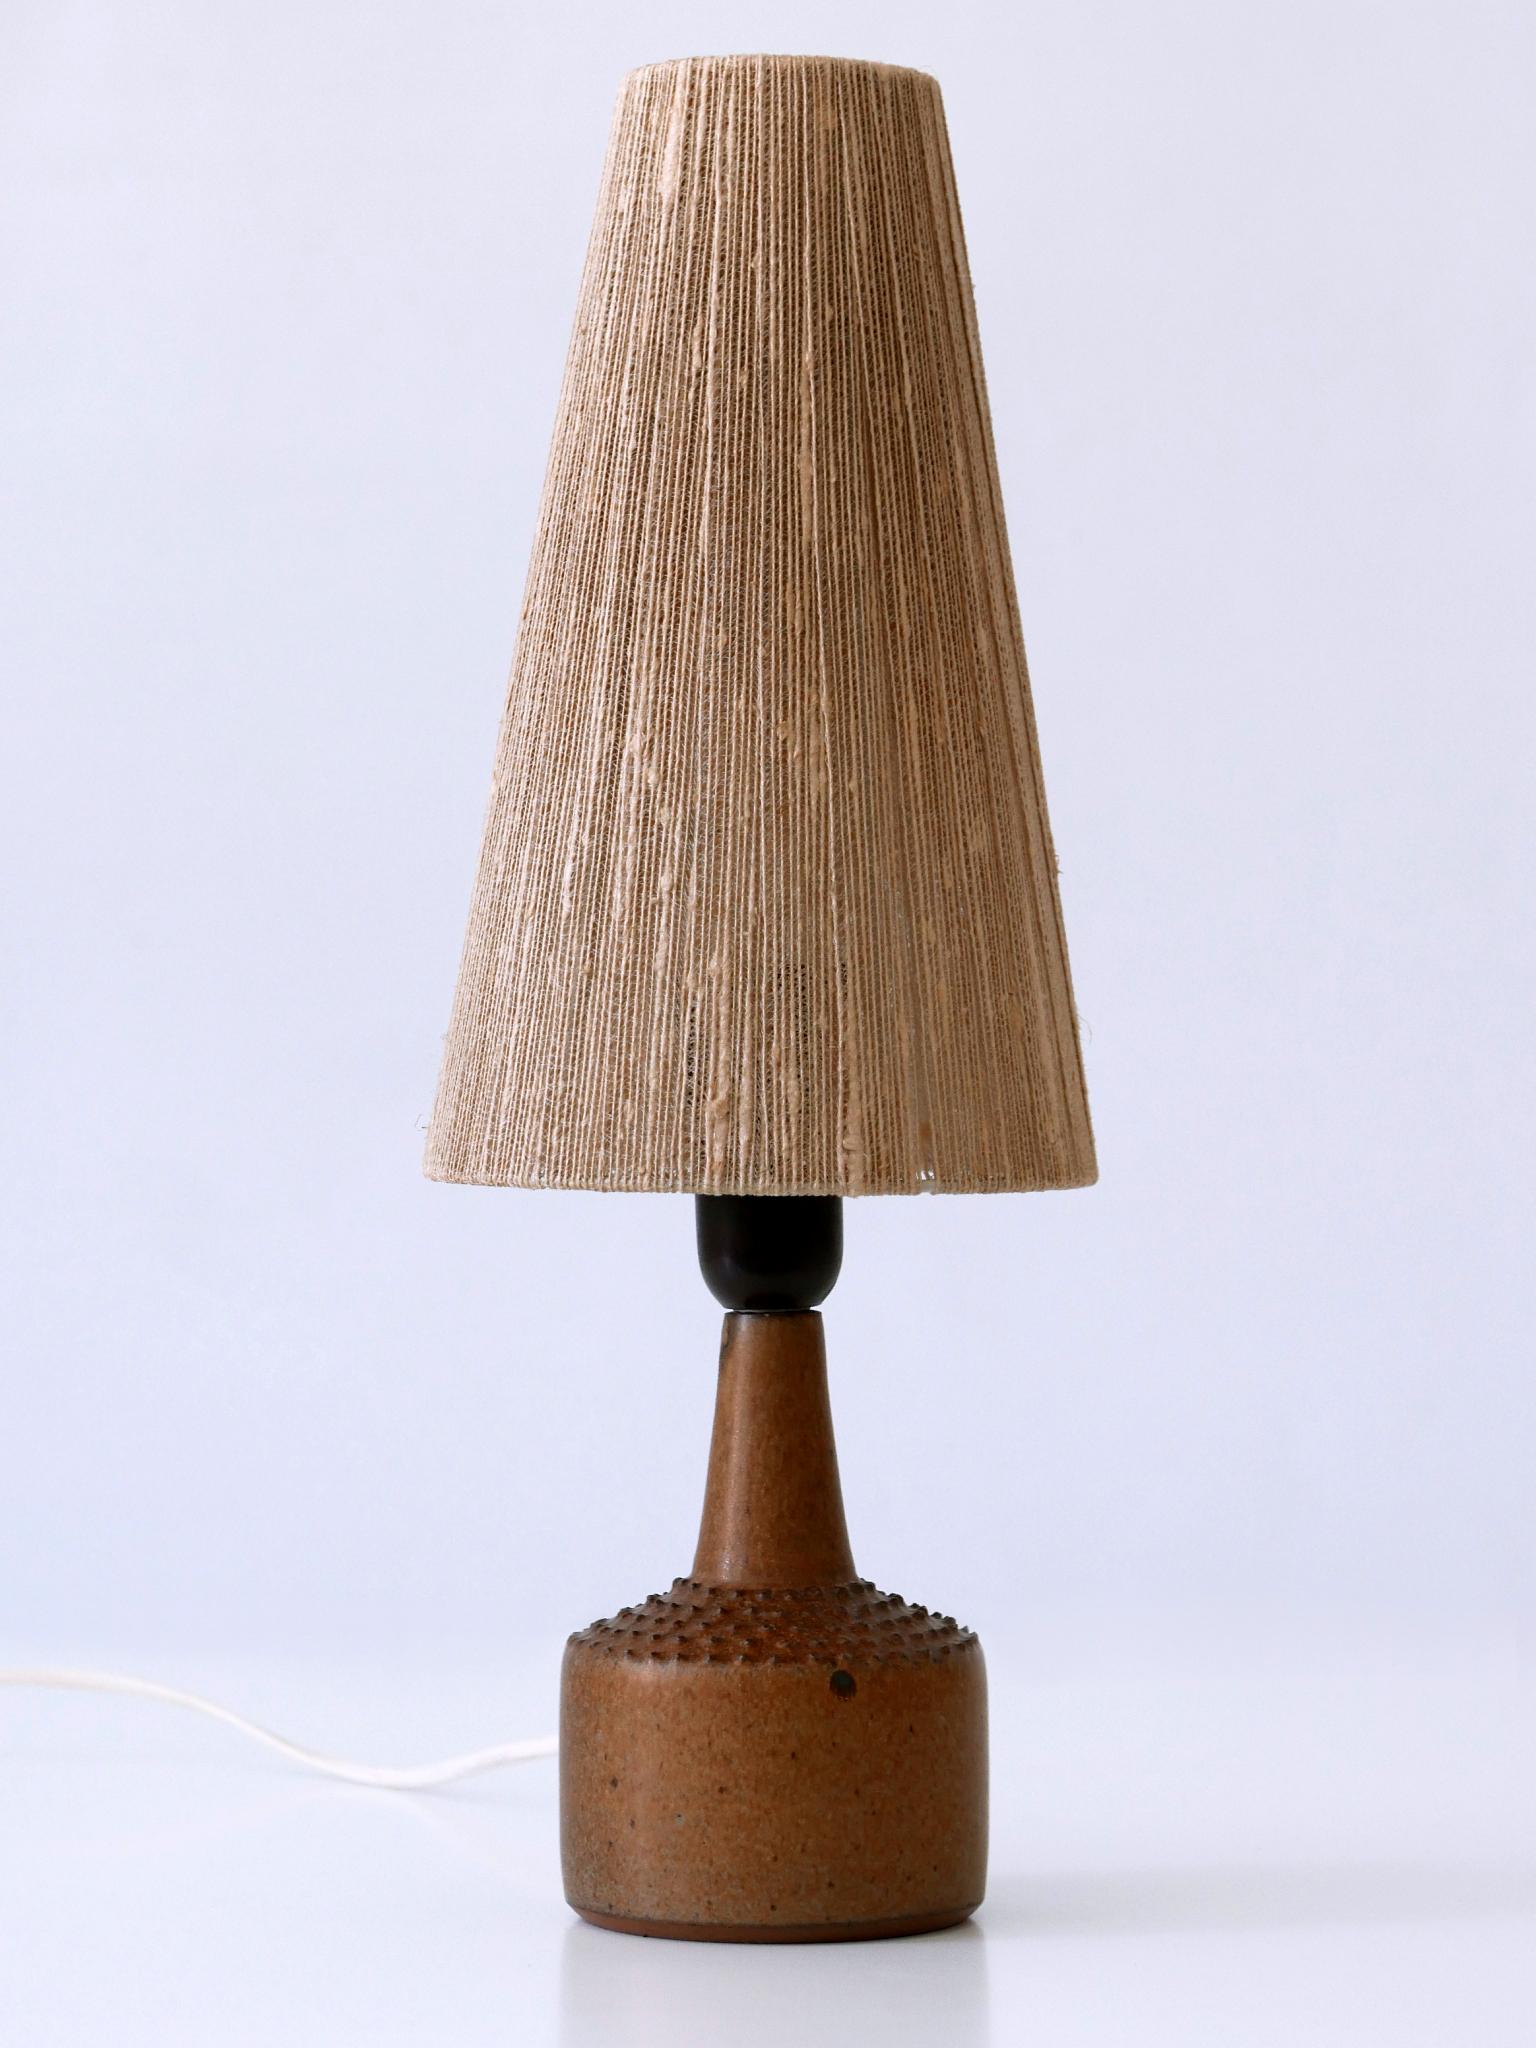 Mid-Century Modern Rare Mid-Century Glazed Stoneware Table Lamp by Rolf Palm for Mölle Sweden 1962